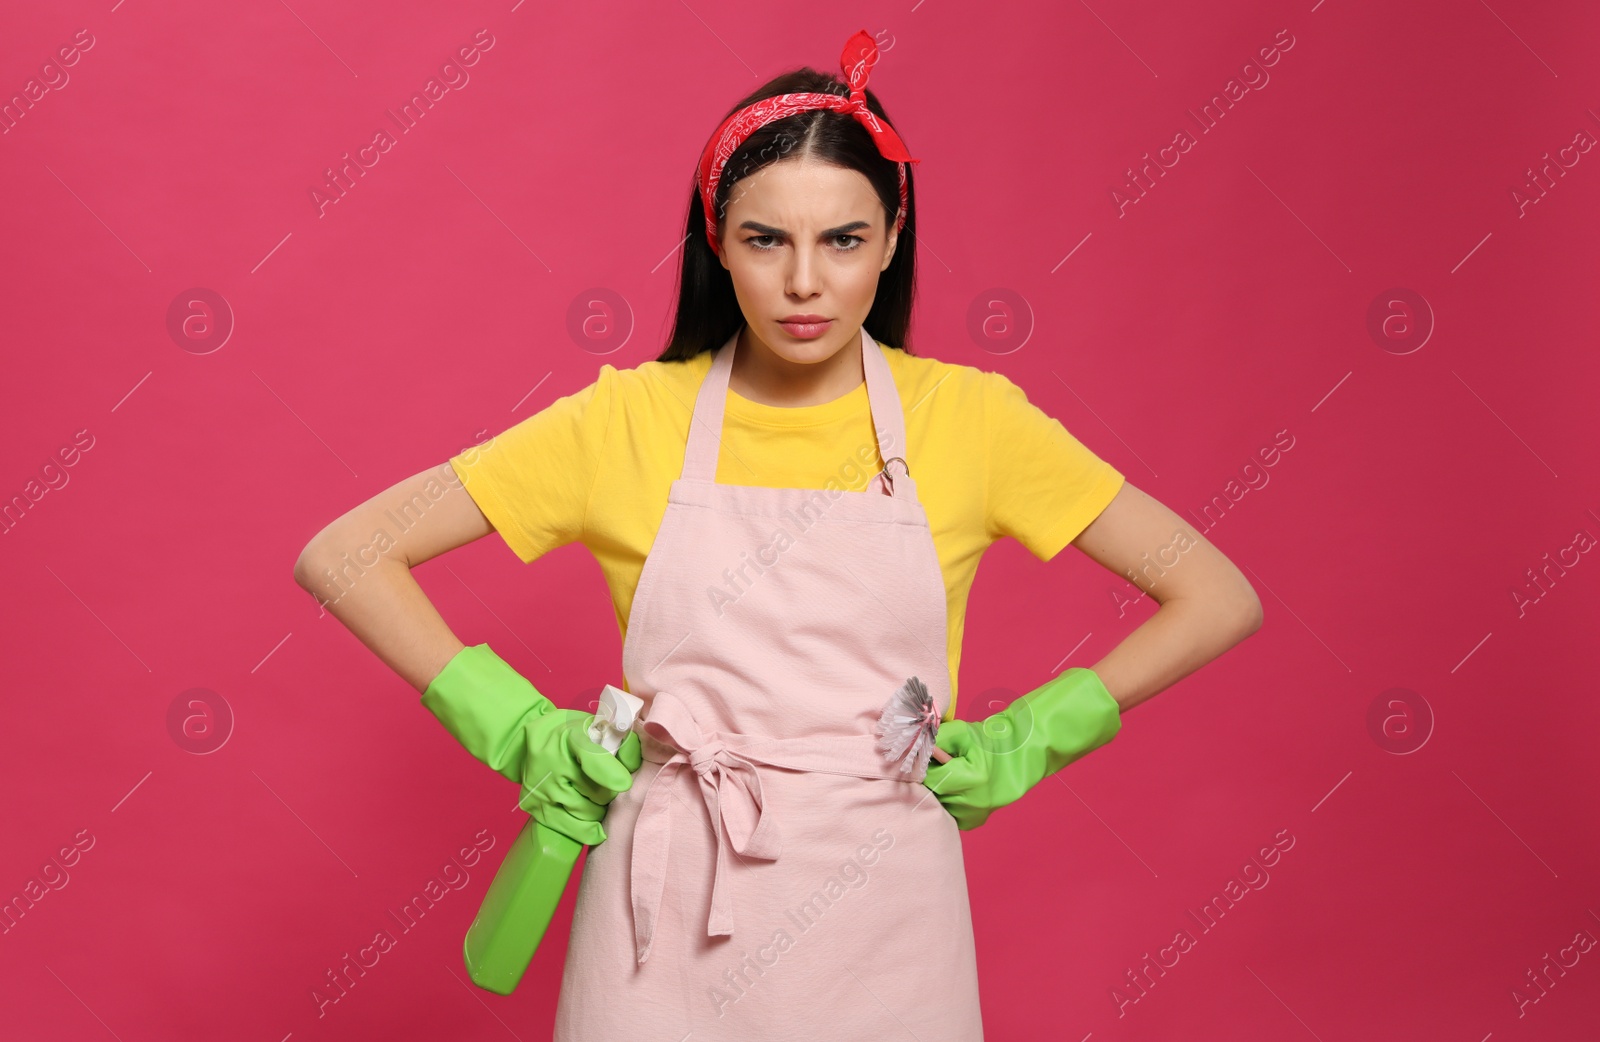 Photo of Emotional housewife with detergent and brush on pink background